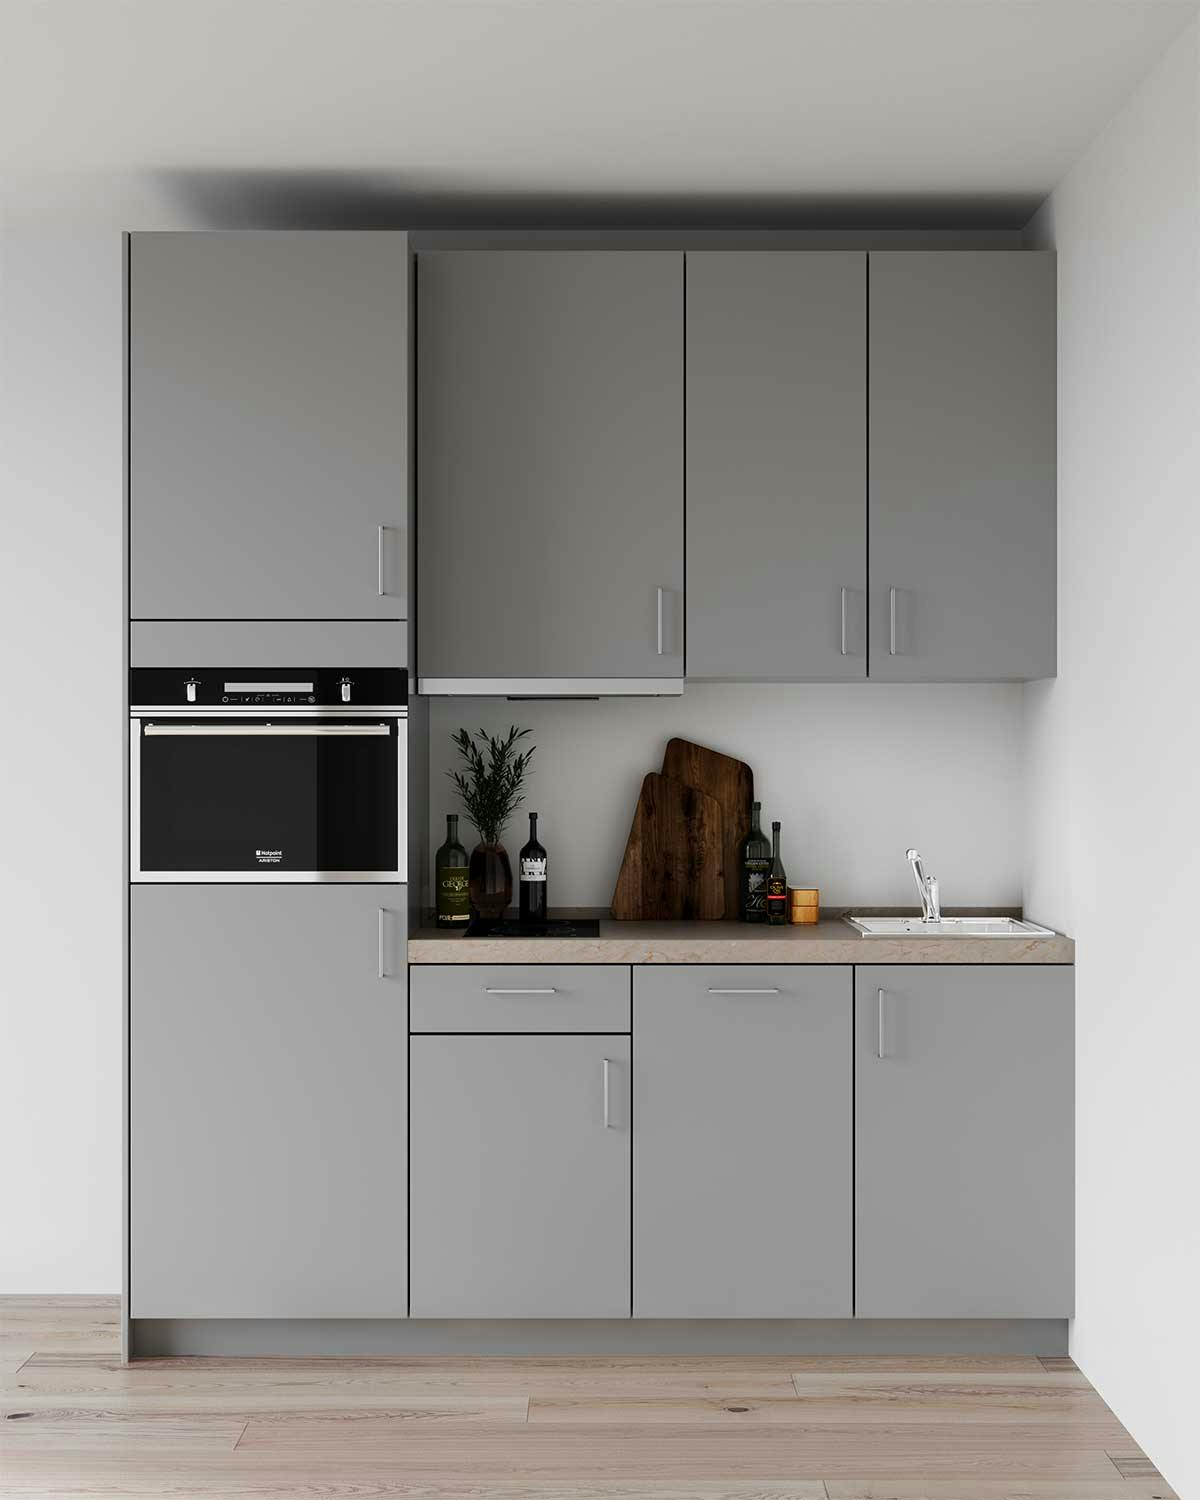 3D Product Visualization of the grey Kitchen in apartment in Frankfurt, Germany.